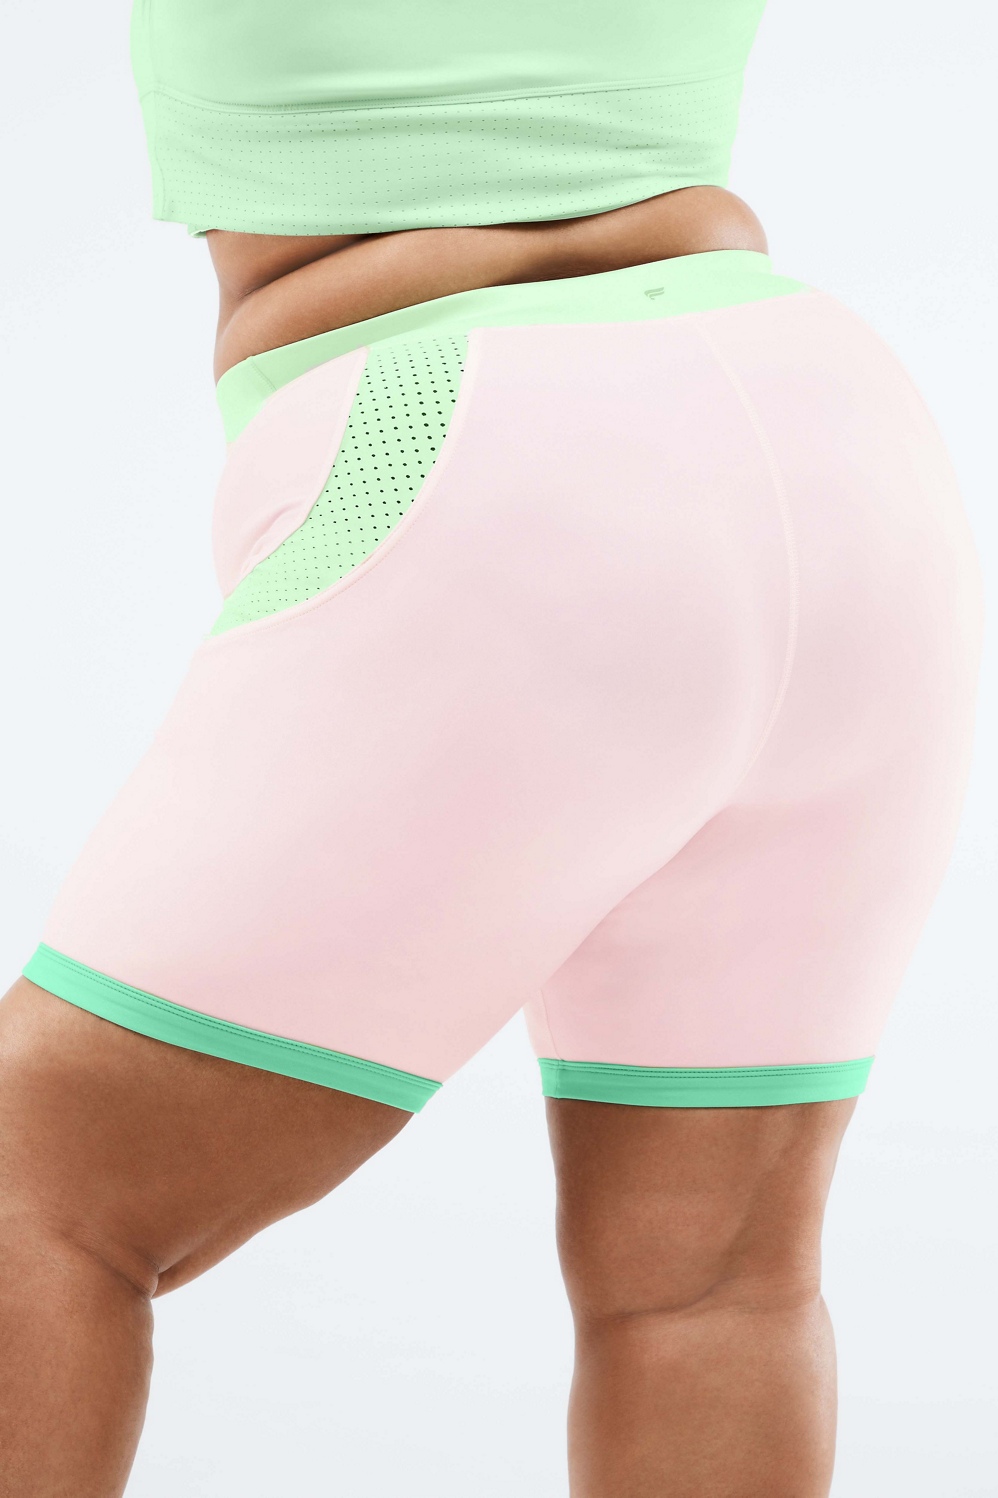 High-Waisted Motion365® Pocket Shorts 5 Fabletics  Active wear for women,  Shorts with pockets, No slip headbands